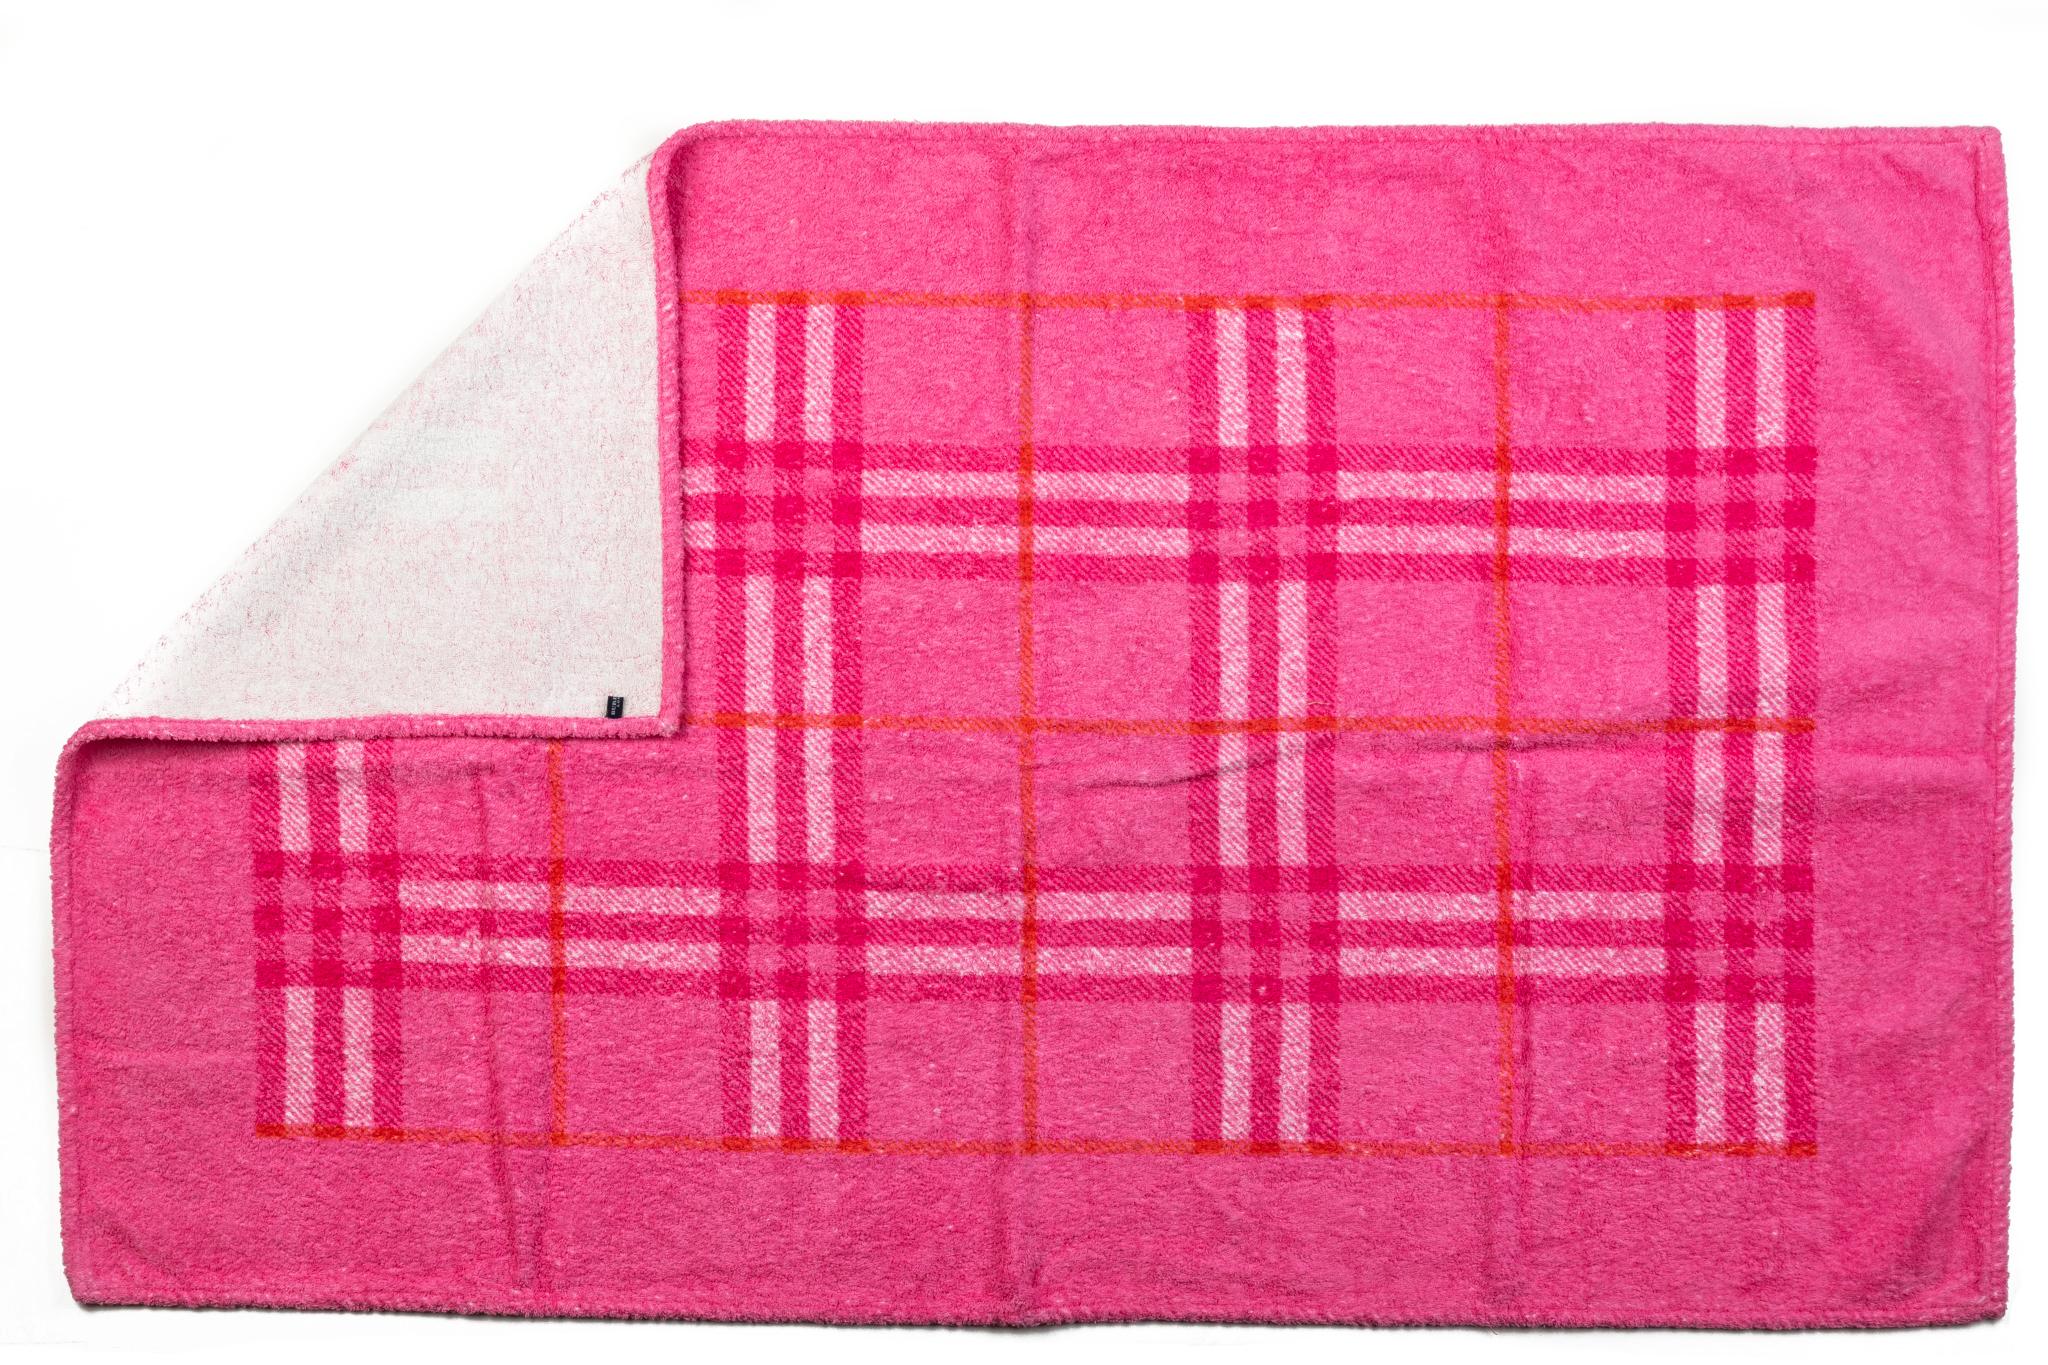 Burberry brand new 100% cotton beach towel in fuchsia checkered pattern. Étiquette d'entretien jointe.